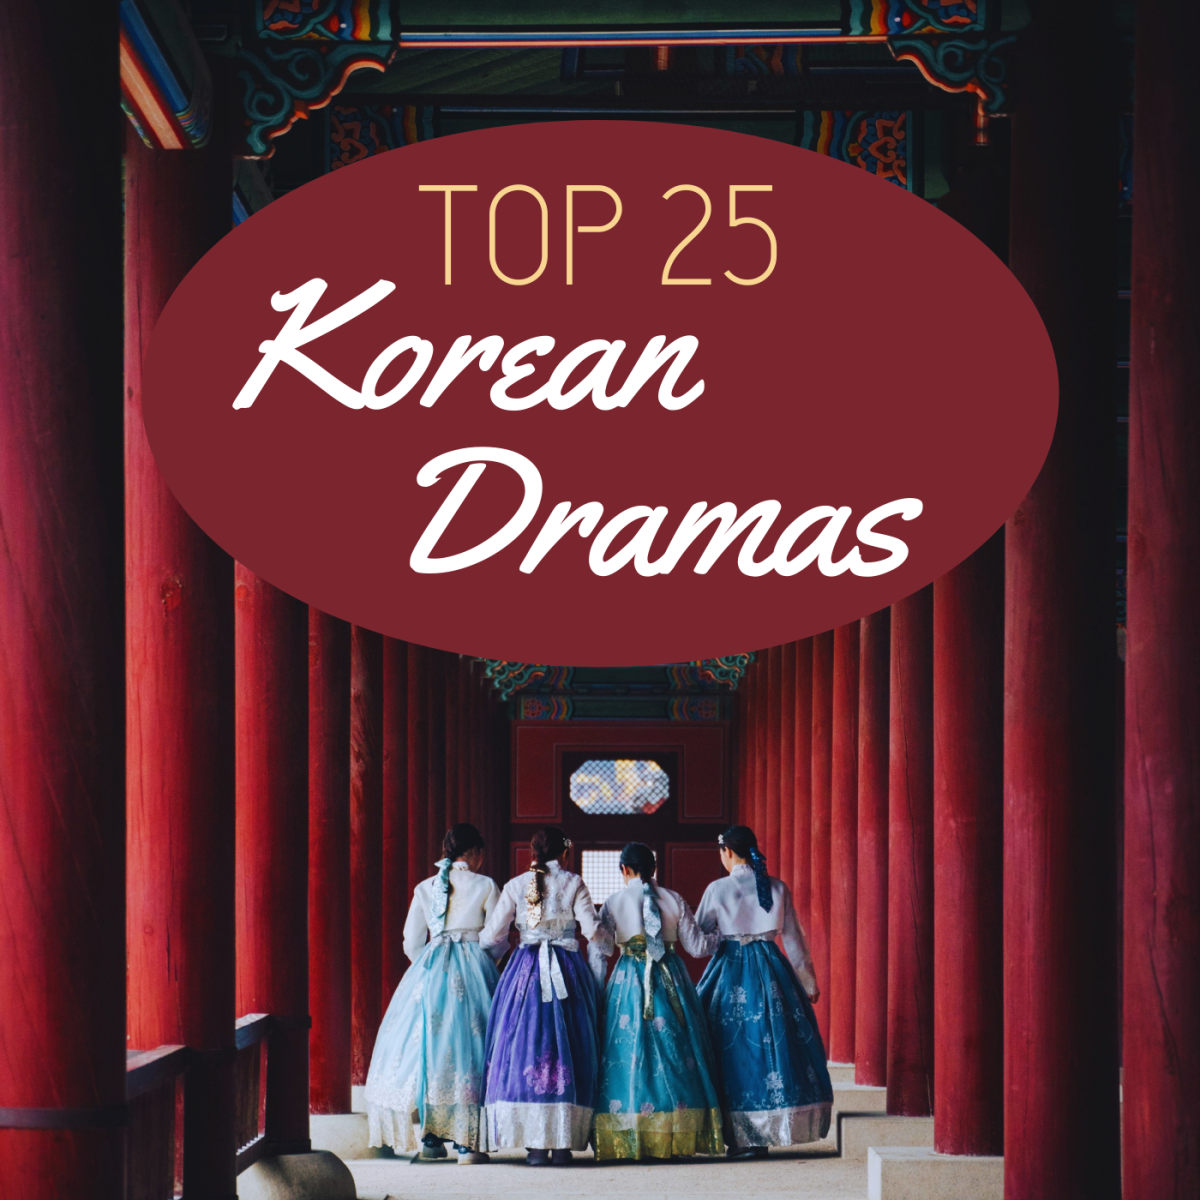 The 25 Best Korean Dramas of All Time